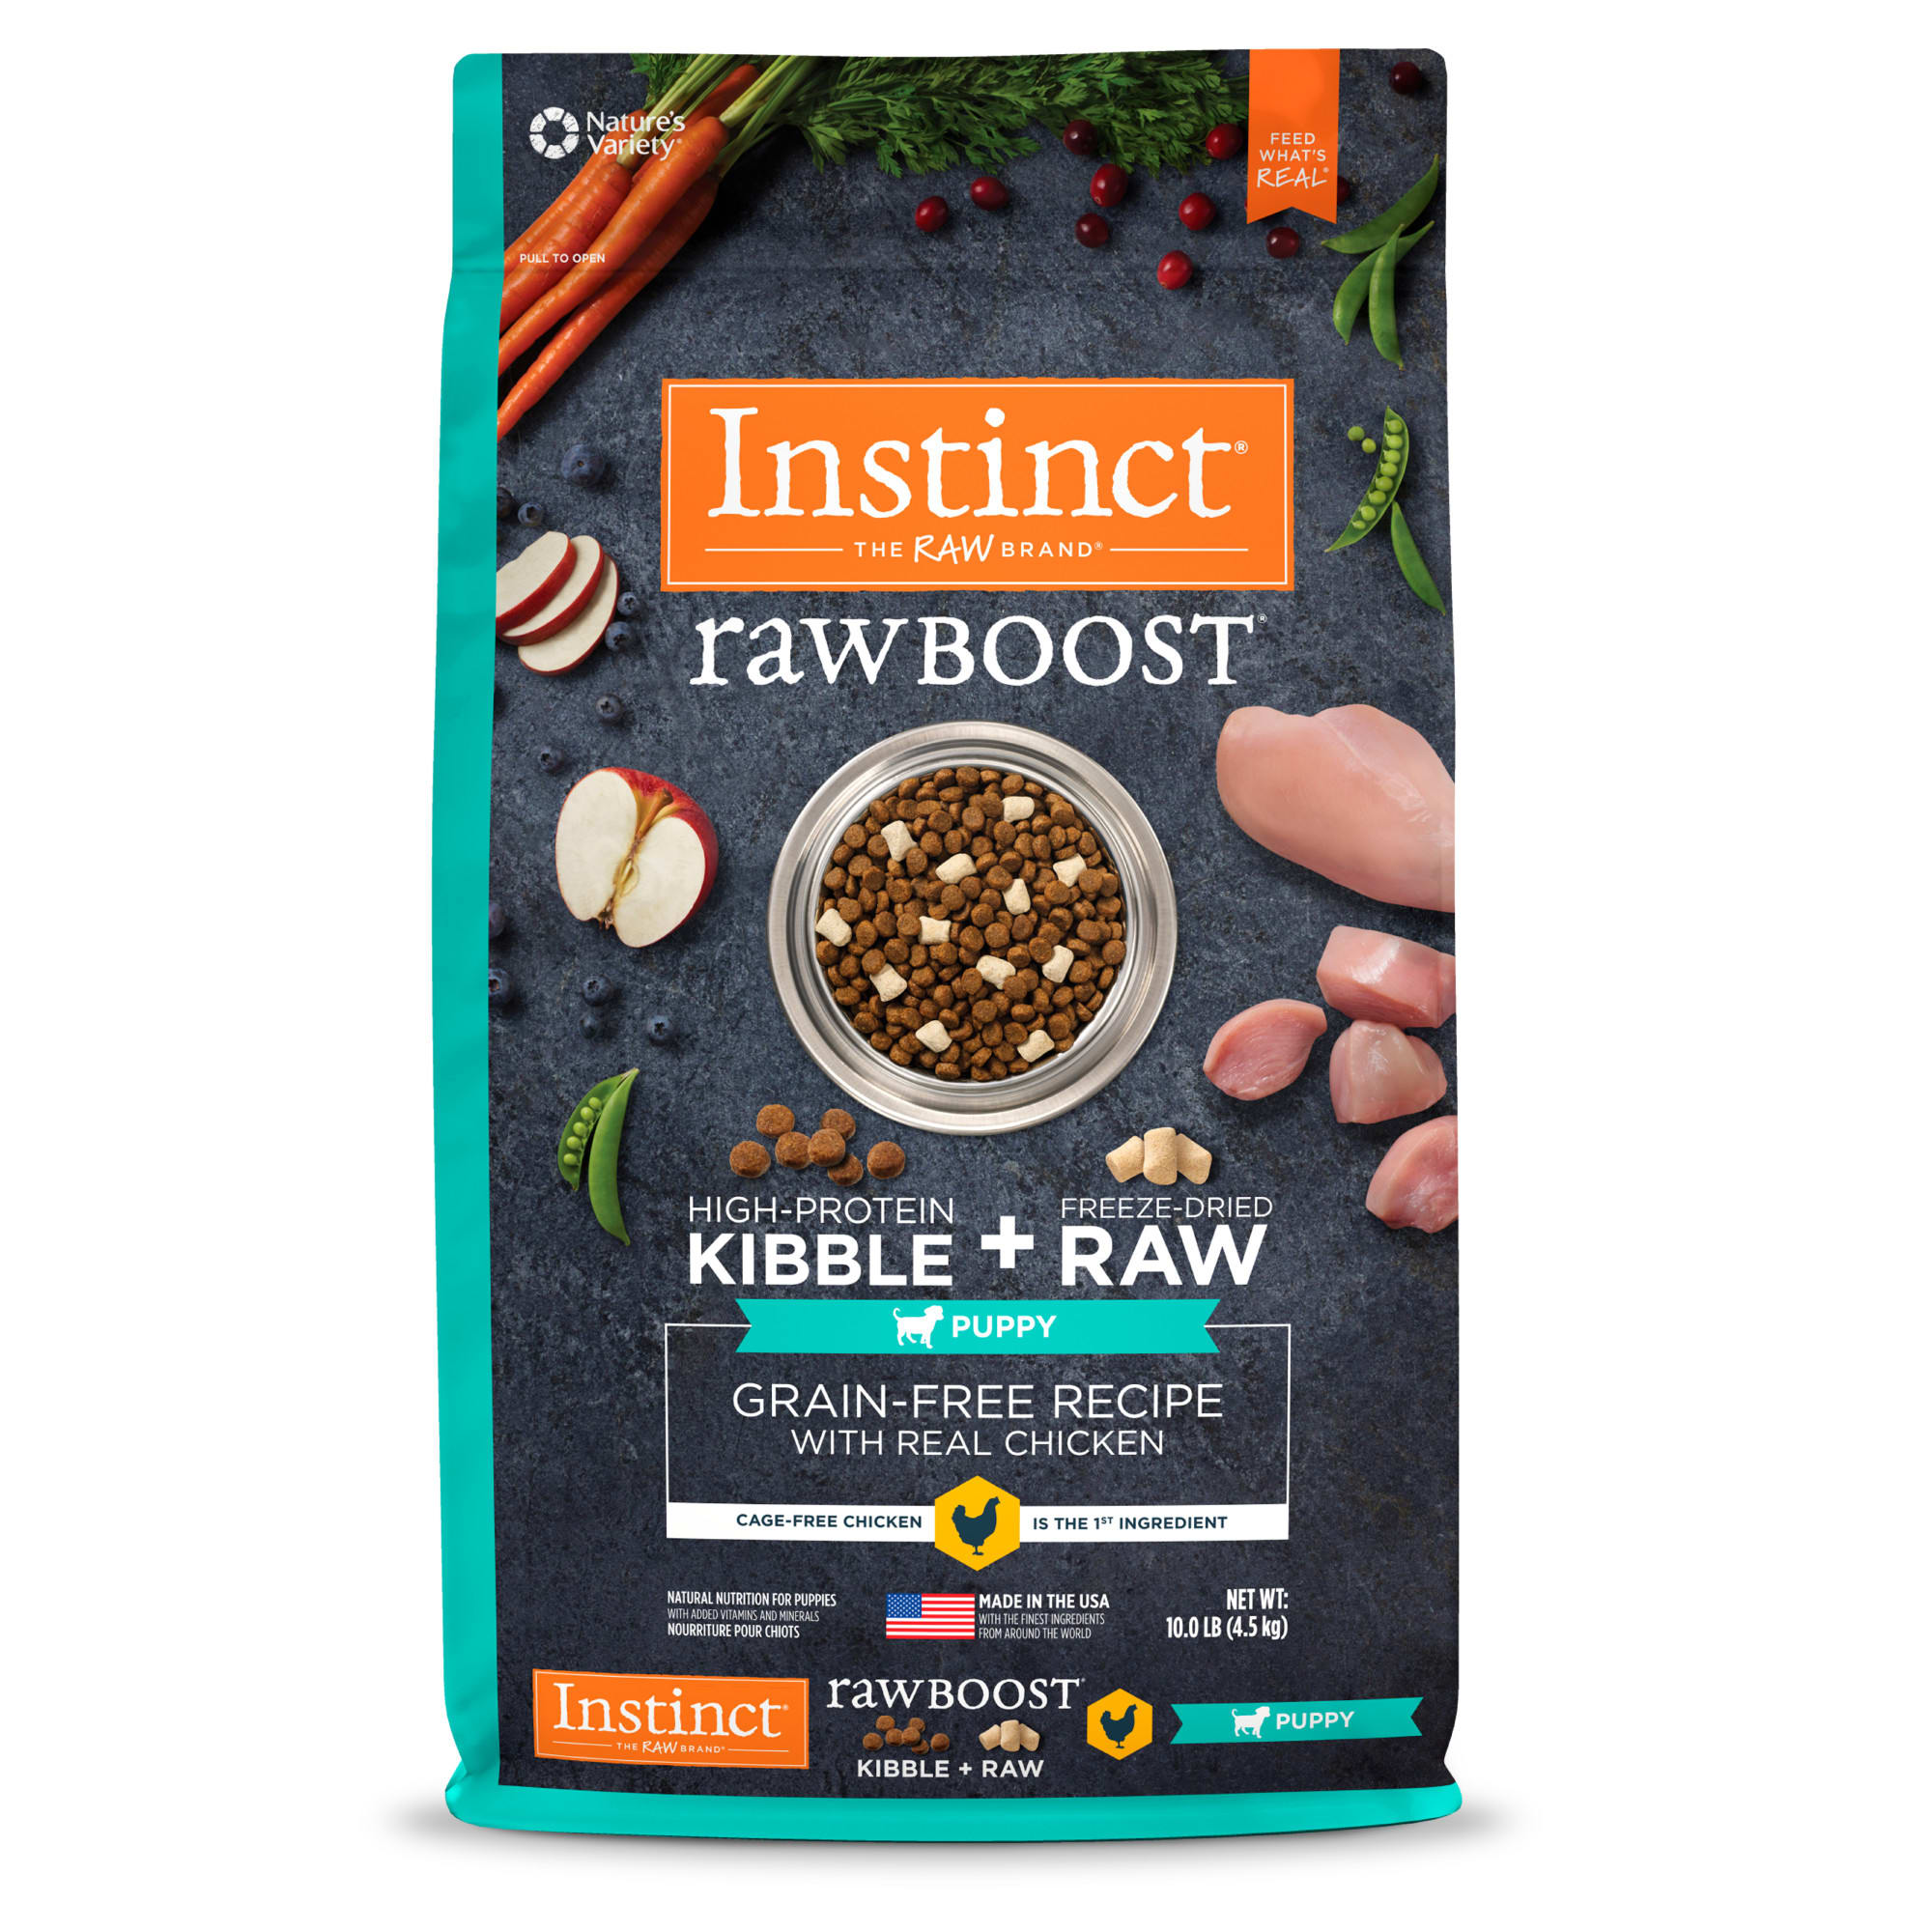 Instinct Raw Boost Puppy Grain-Free Recipe with Real Chicken Dry Food with Freeze-Dried Raw Pieces